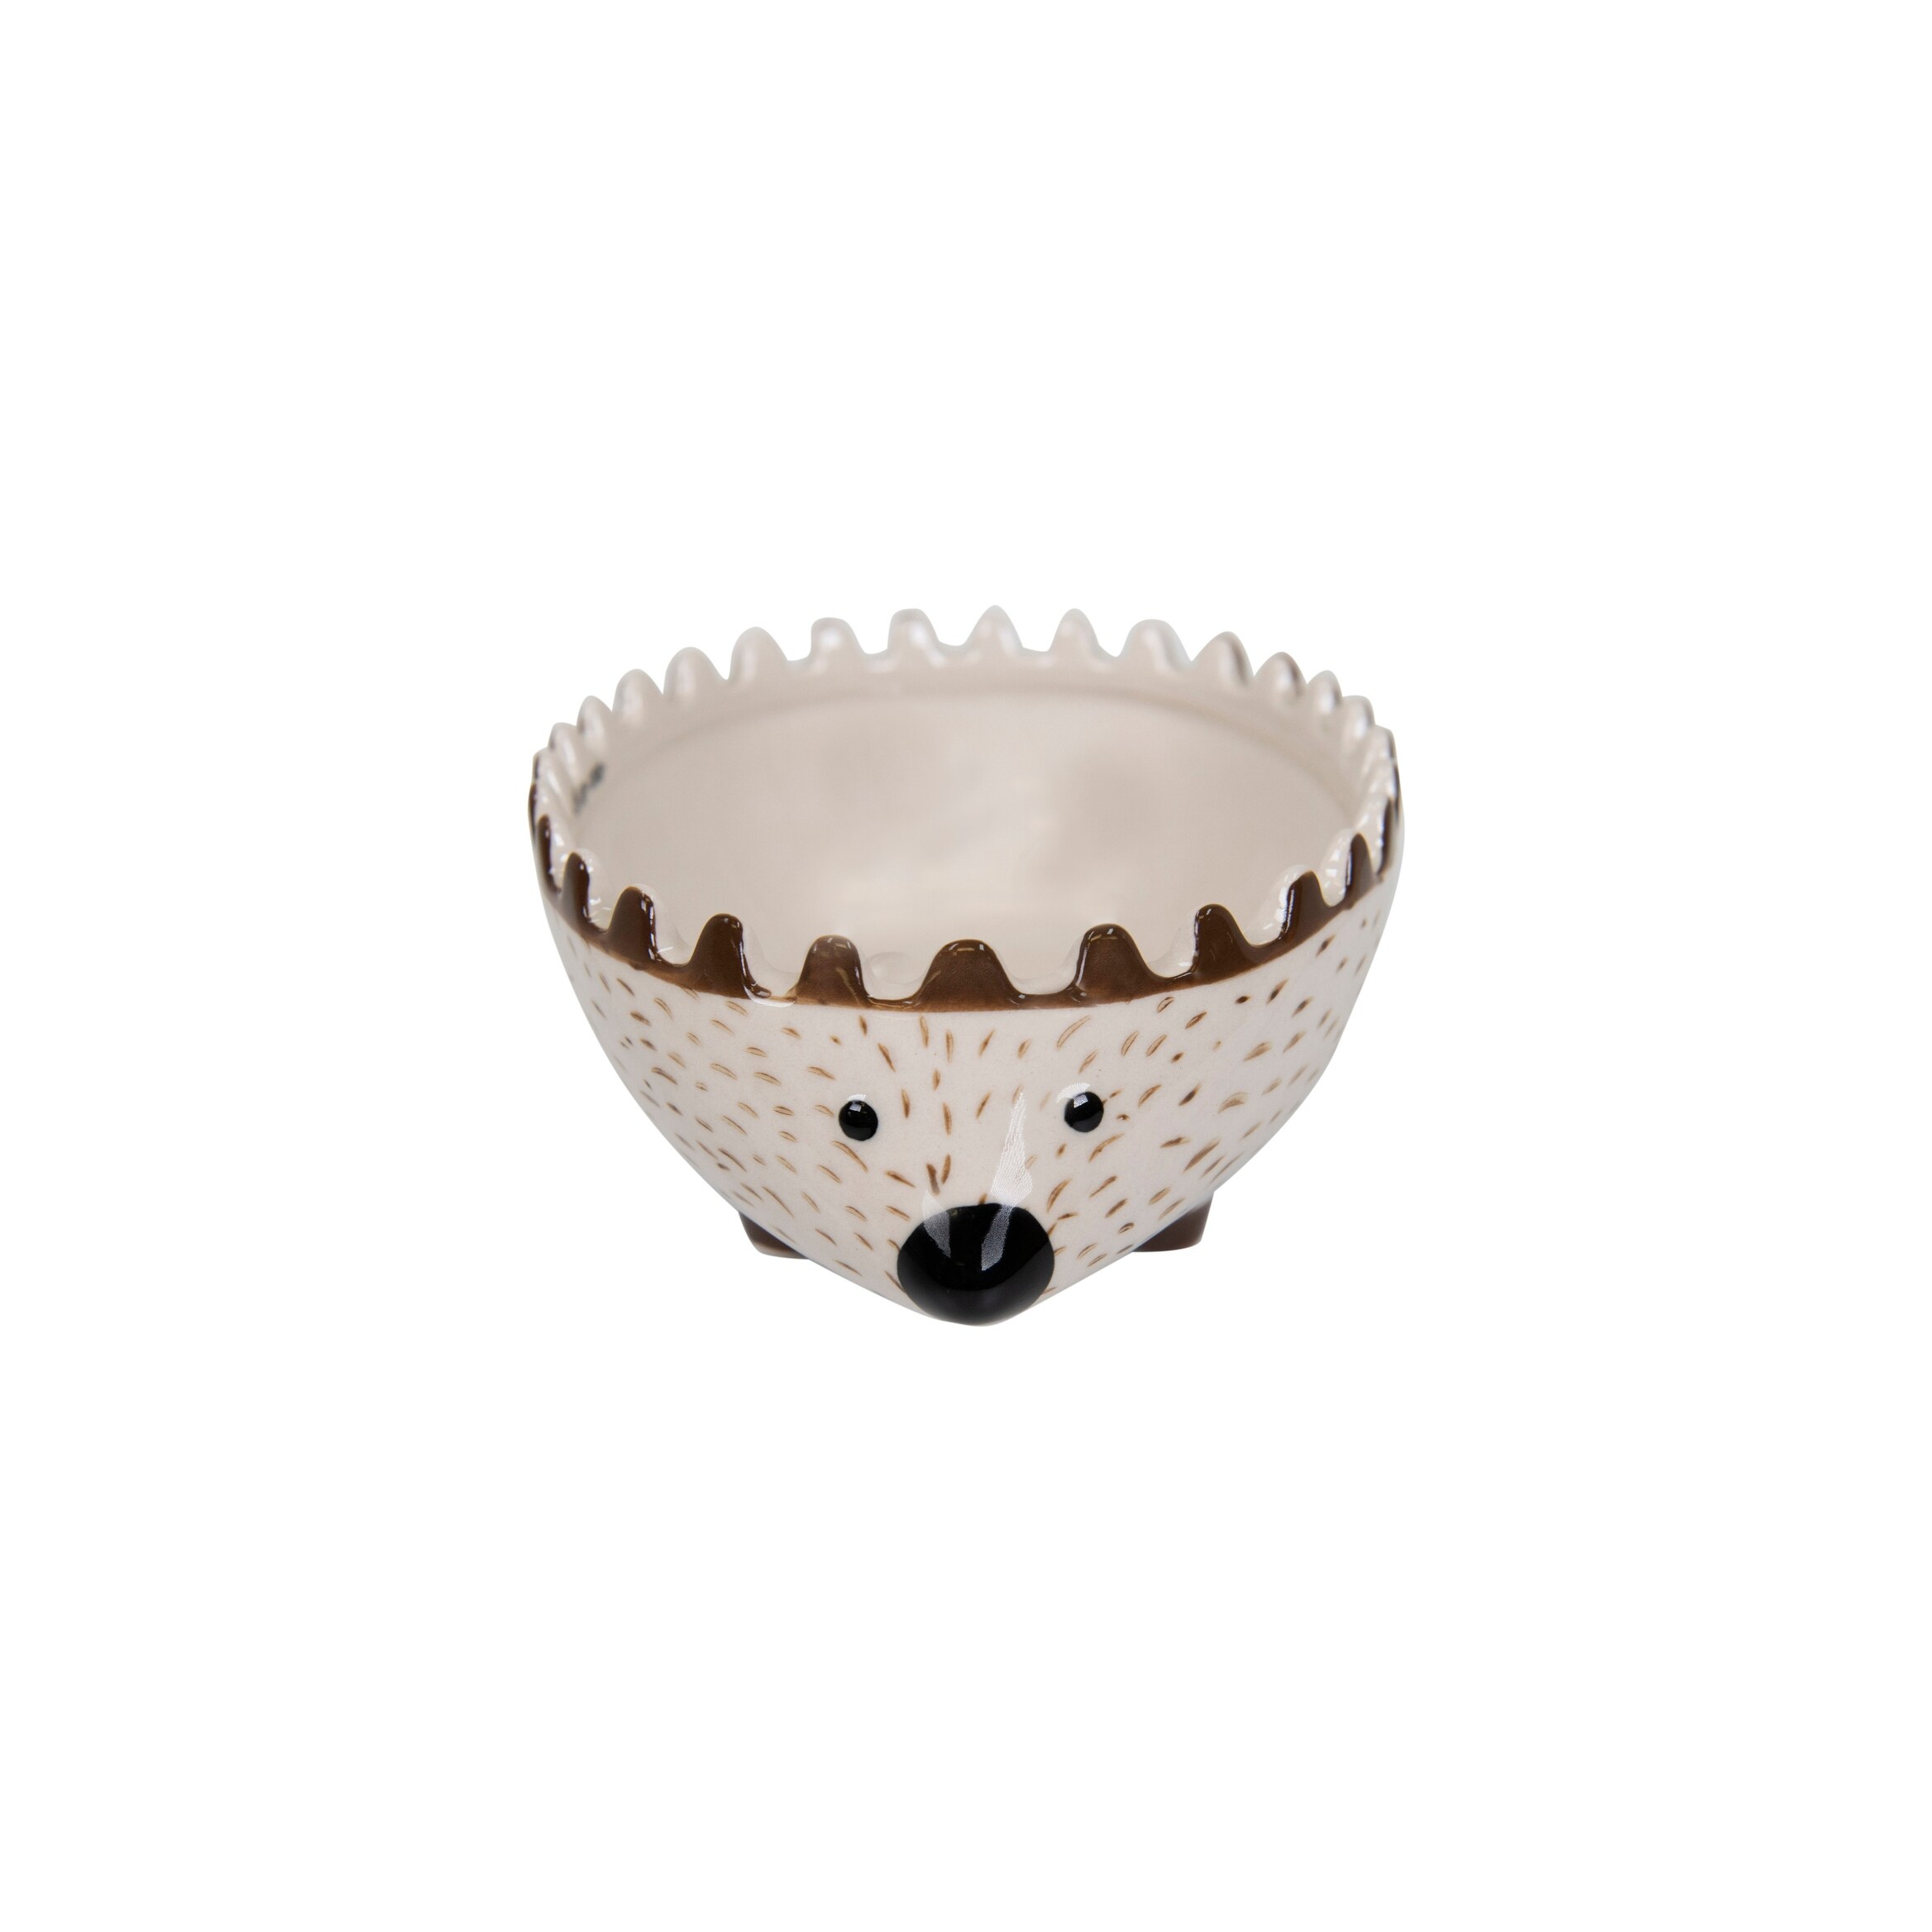 https://ak1.ostkcdn.com/images/products/is/images/direct/973e9a30eae728376ecb1afc8a9212e3ca670ada/Hand-Painted-Stoneware-Hedgehog-Measuring-Cups-%28Set-of-4-Sizes%29.jpg